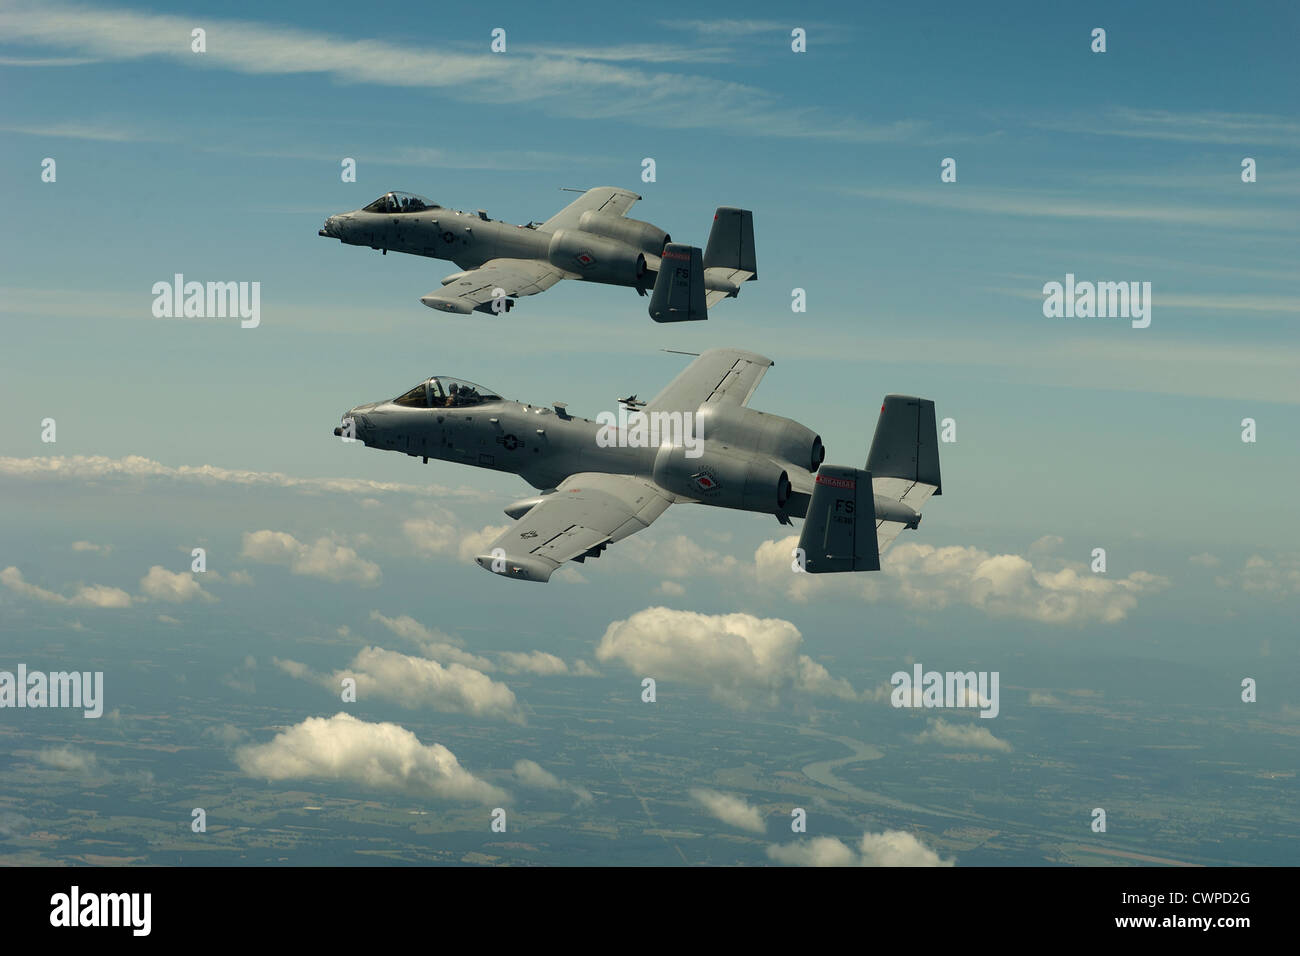 Two A-10 Thunderbolt II Warthog jets maneuver in formation June 4, 2012 over the Ouachita National Forest, AR. Stock Photo